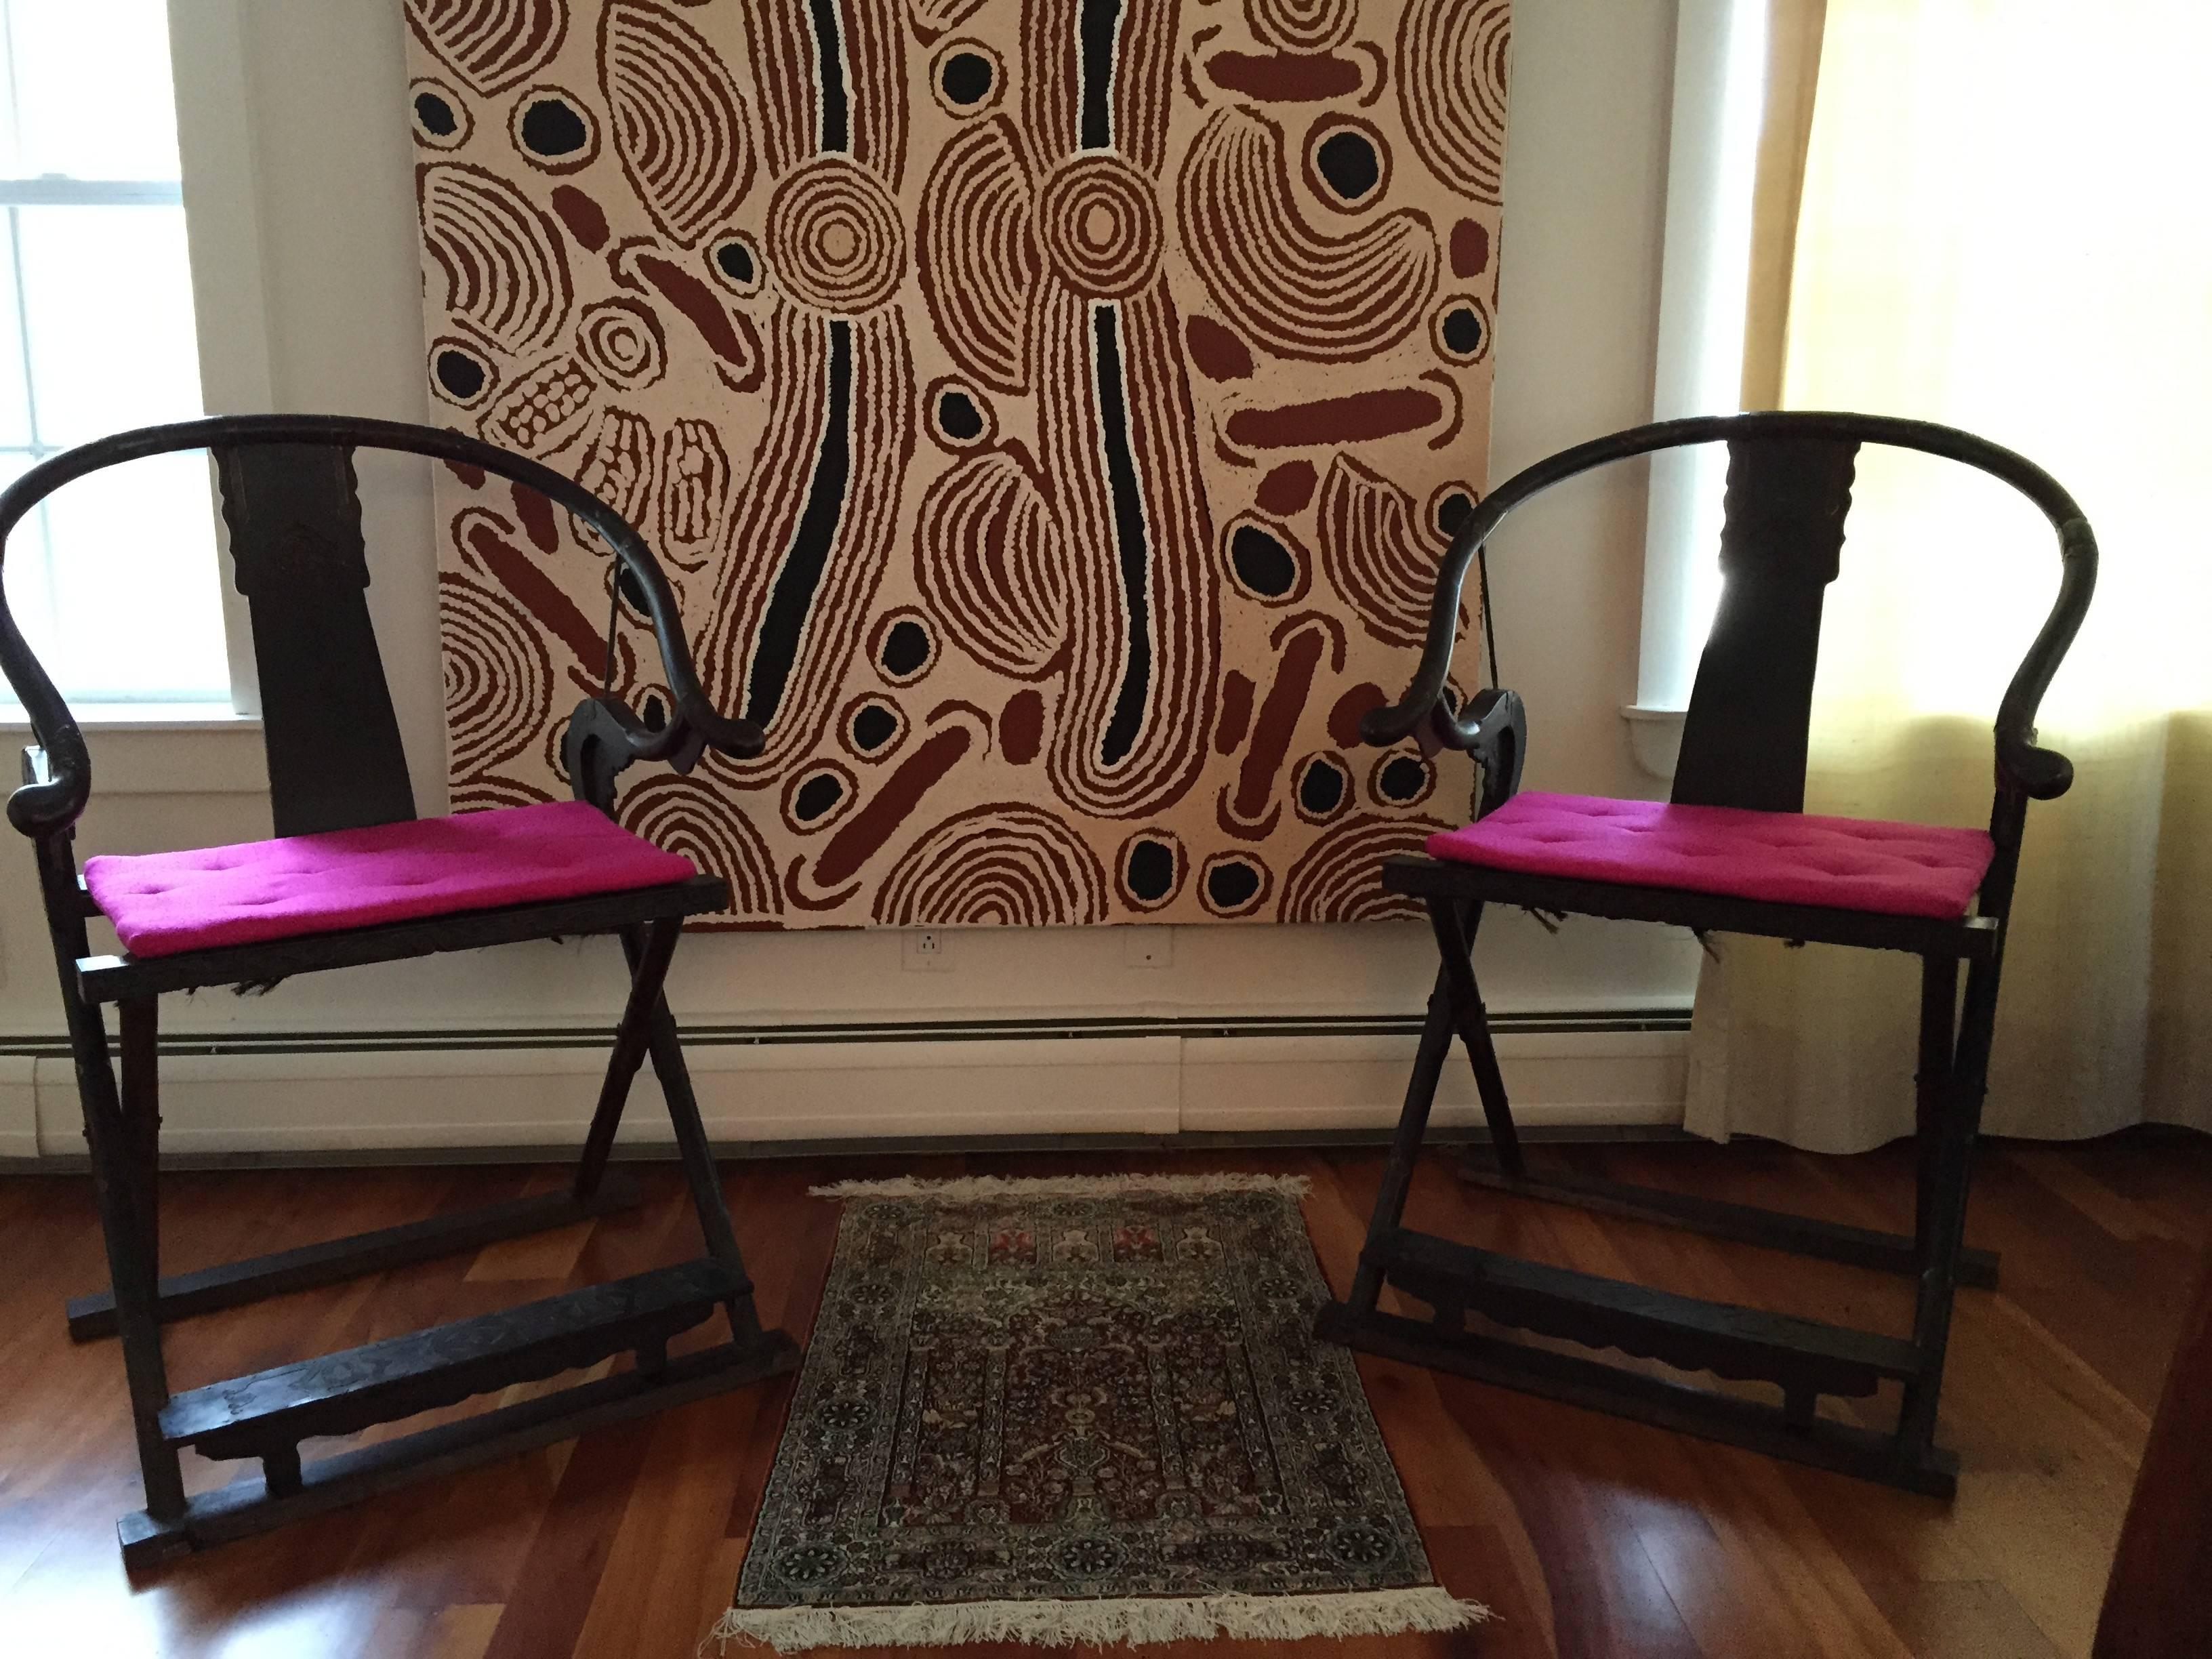 A pair of Chinese folding horseshoe back armchairs, "Jiaoyi," likely dated late Qing dynasty or earlier (1644-1912). They were constructed from a dark wood maybe Zitan, a member of Asian Rosewood that is highly priced for its dense grains